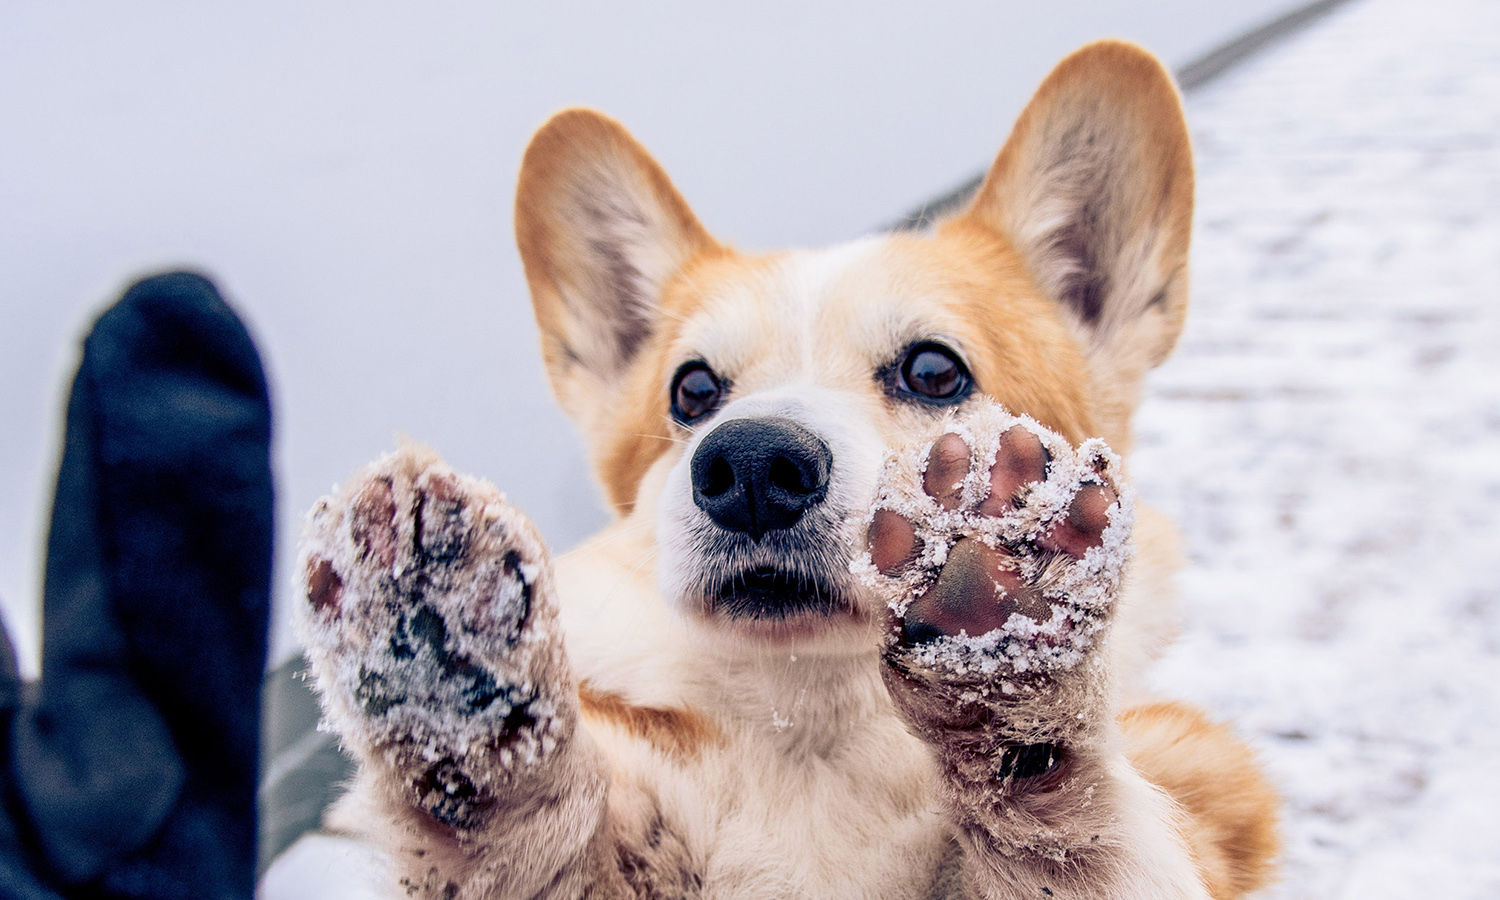 Dog showing his paws covered in snow